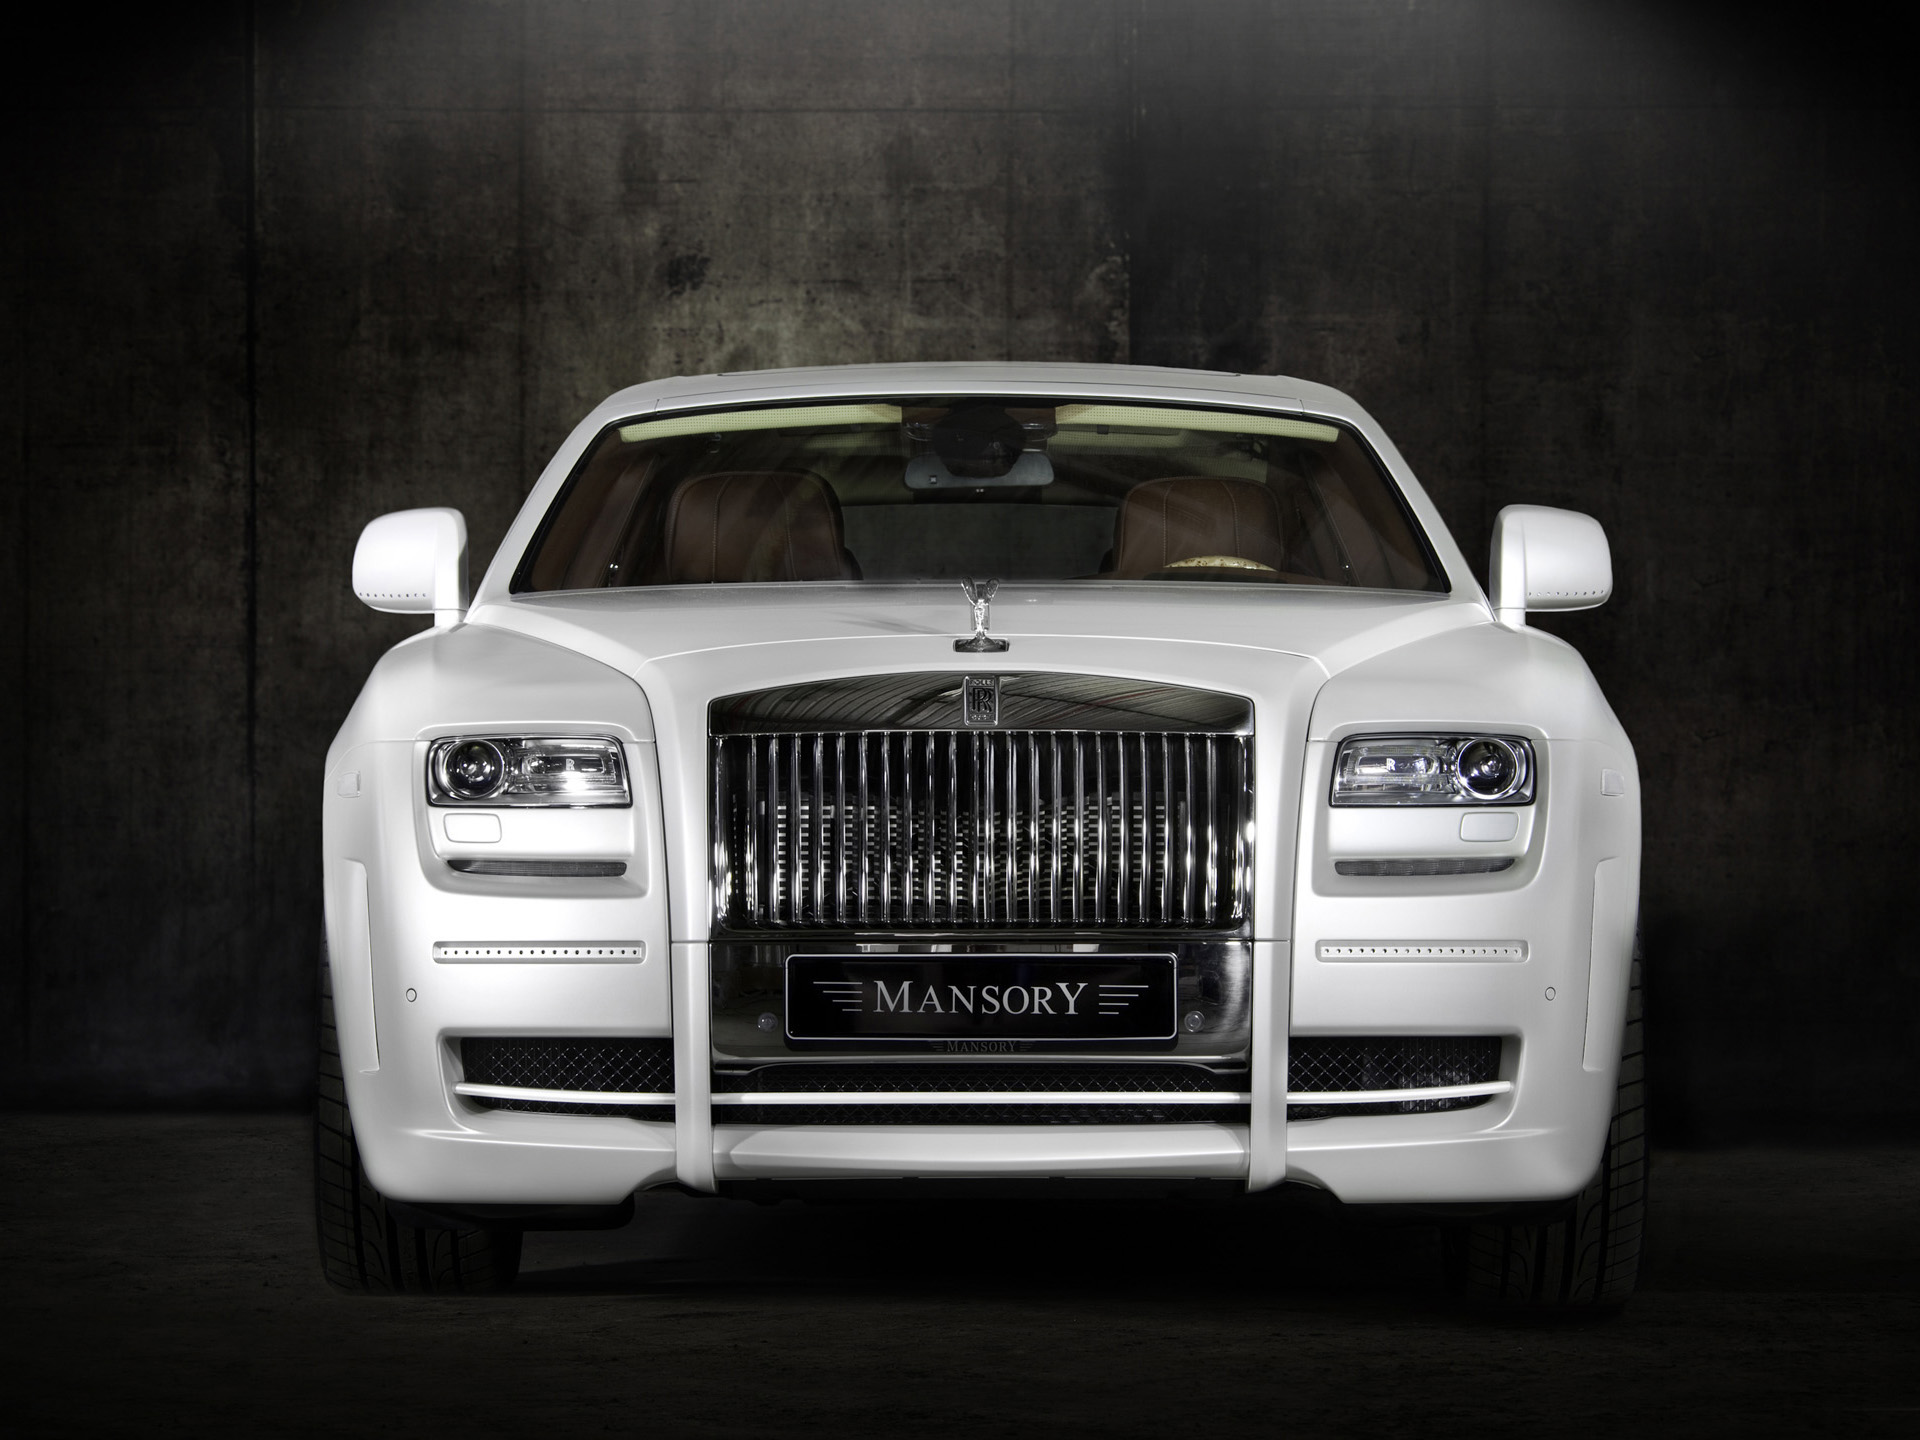 2010 Mansory Rolls-Royce(˹˹) White Ghost Limited(ֽ8)